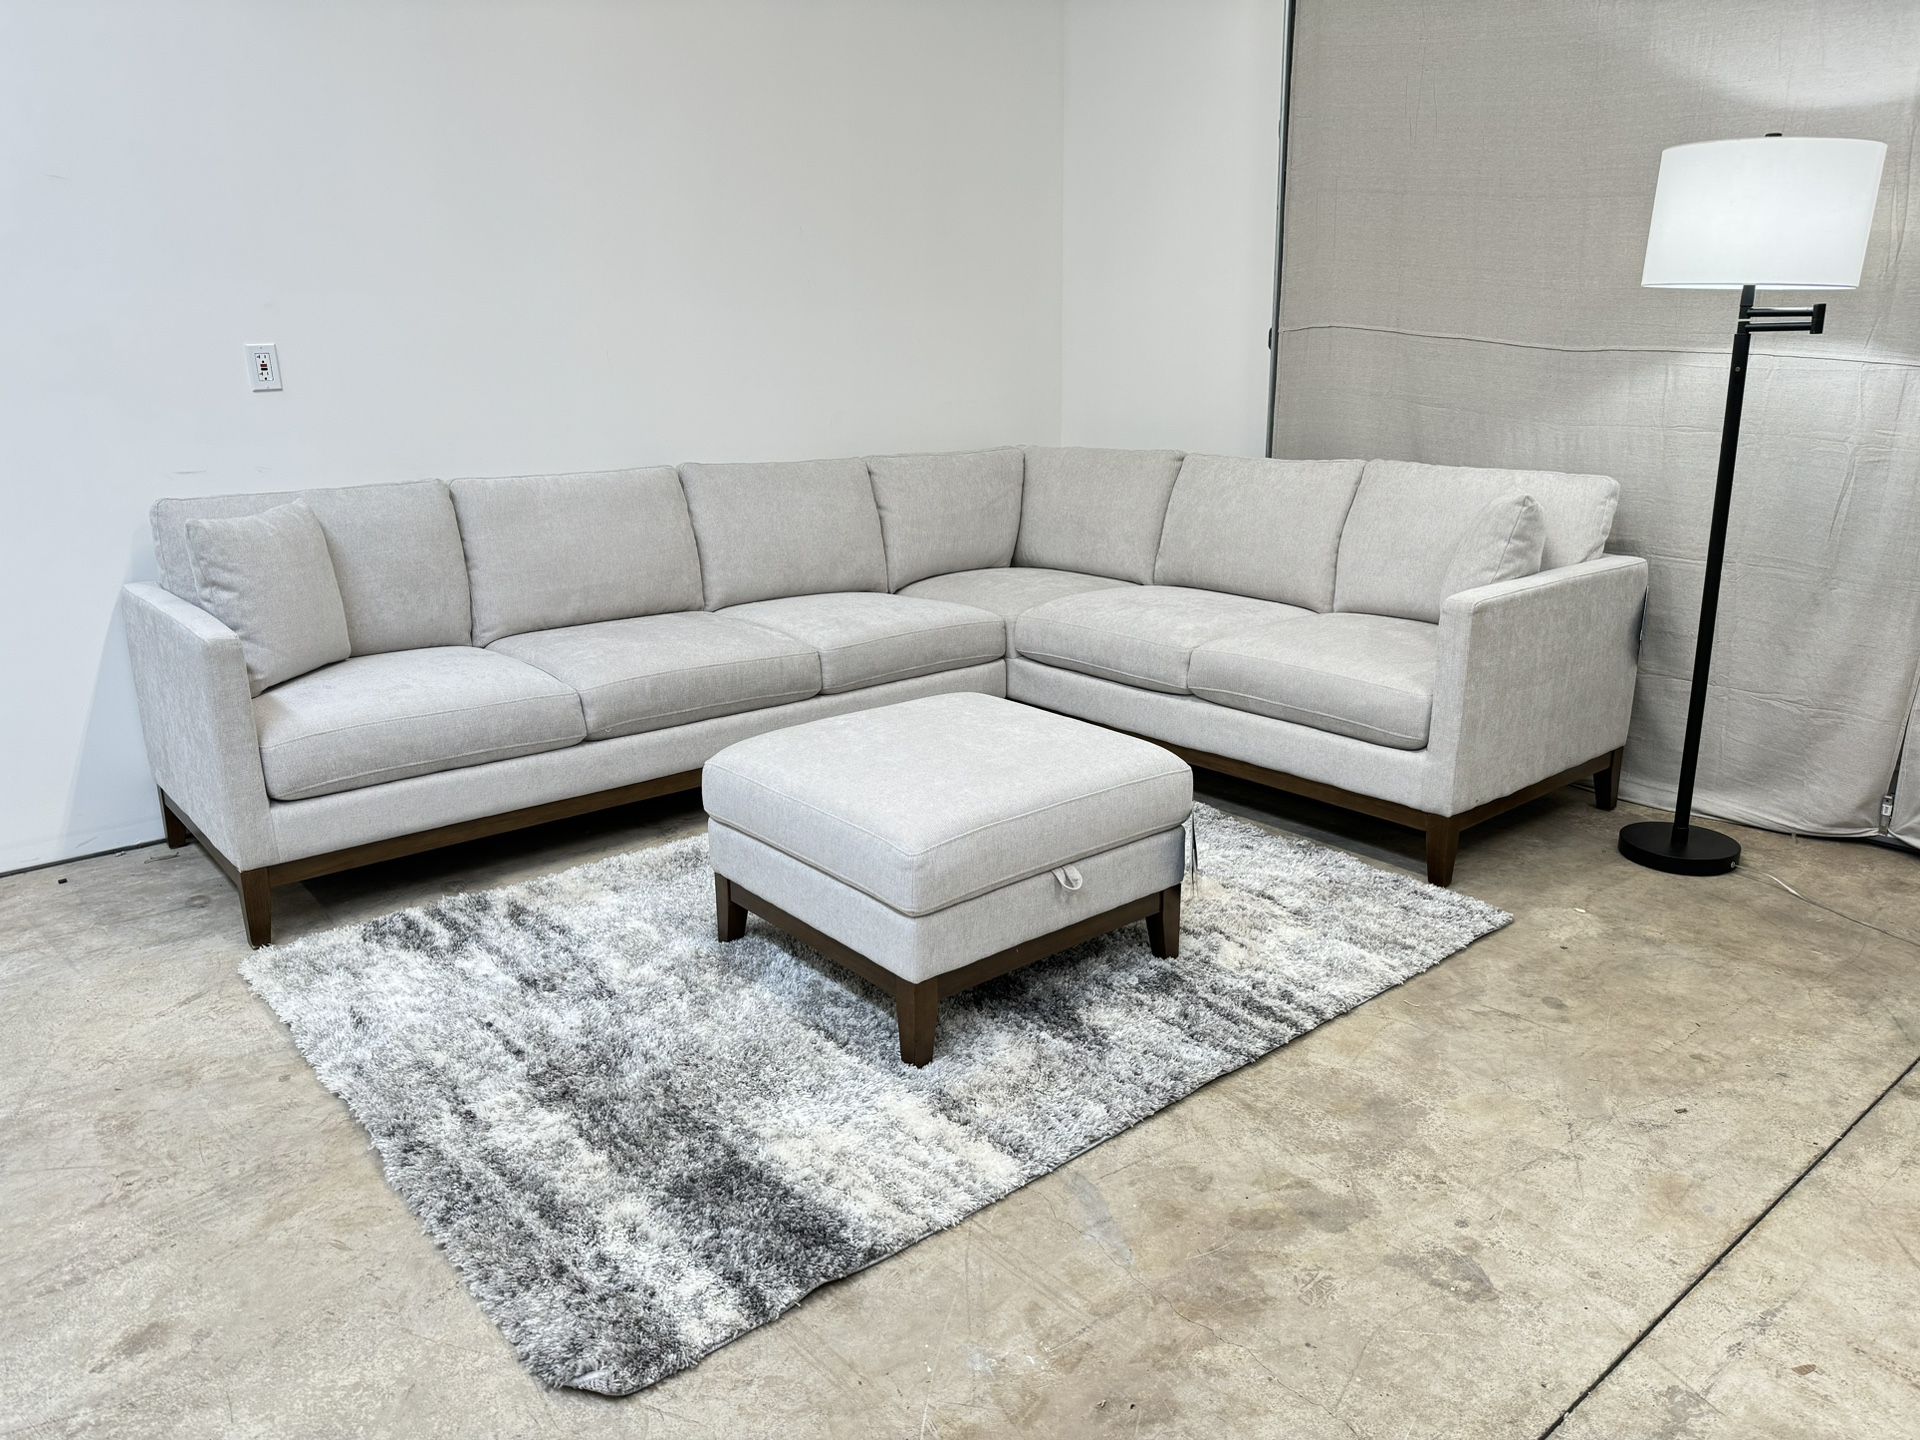 Thomasville Livingston Fabric Sectional with Storage Ottoman